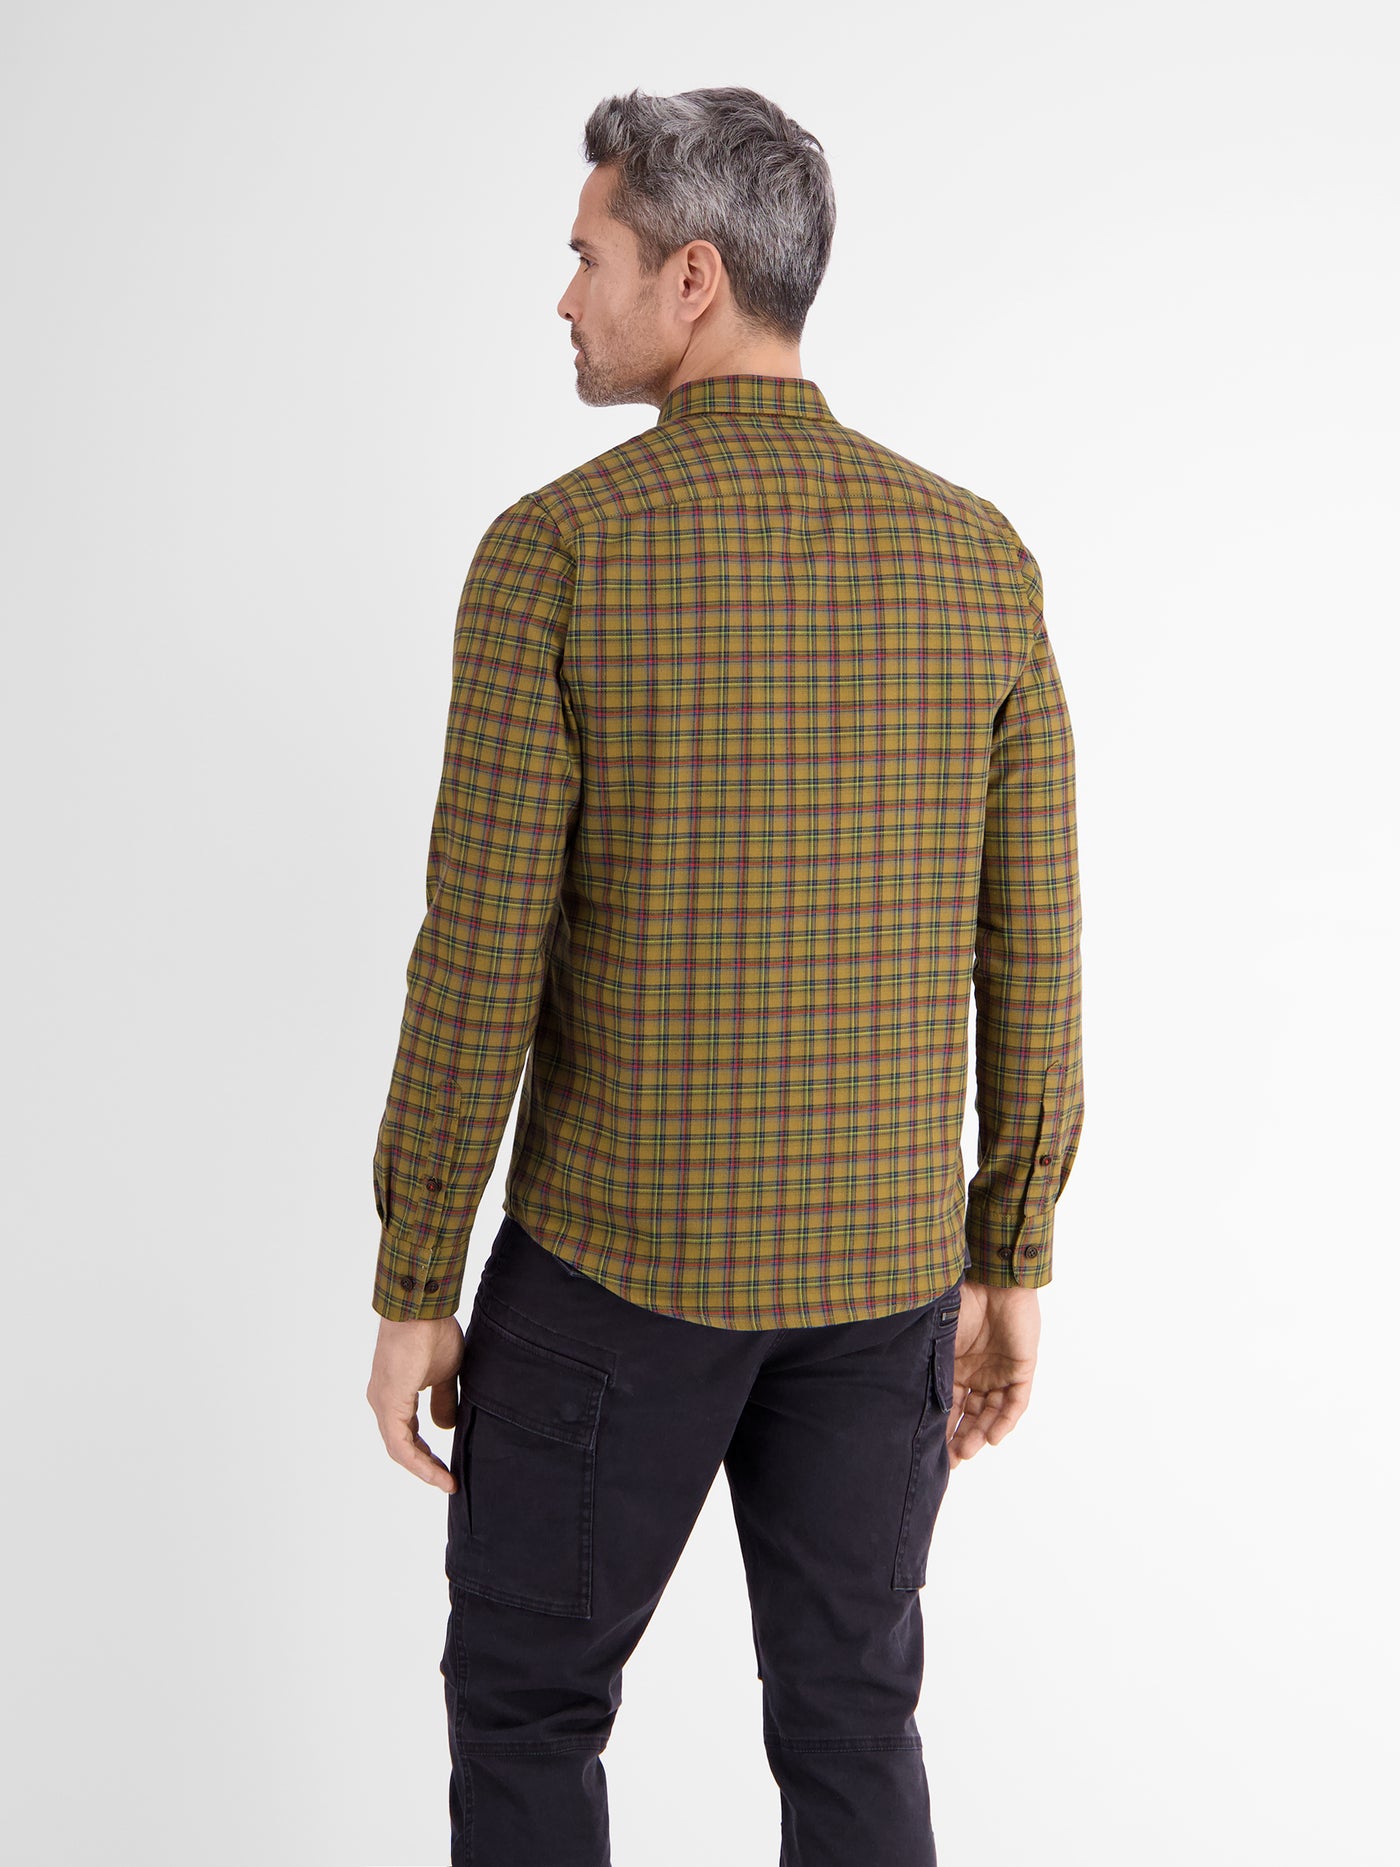 Long-sleeved shirt, checked, concealed button-down collar